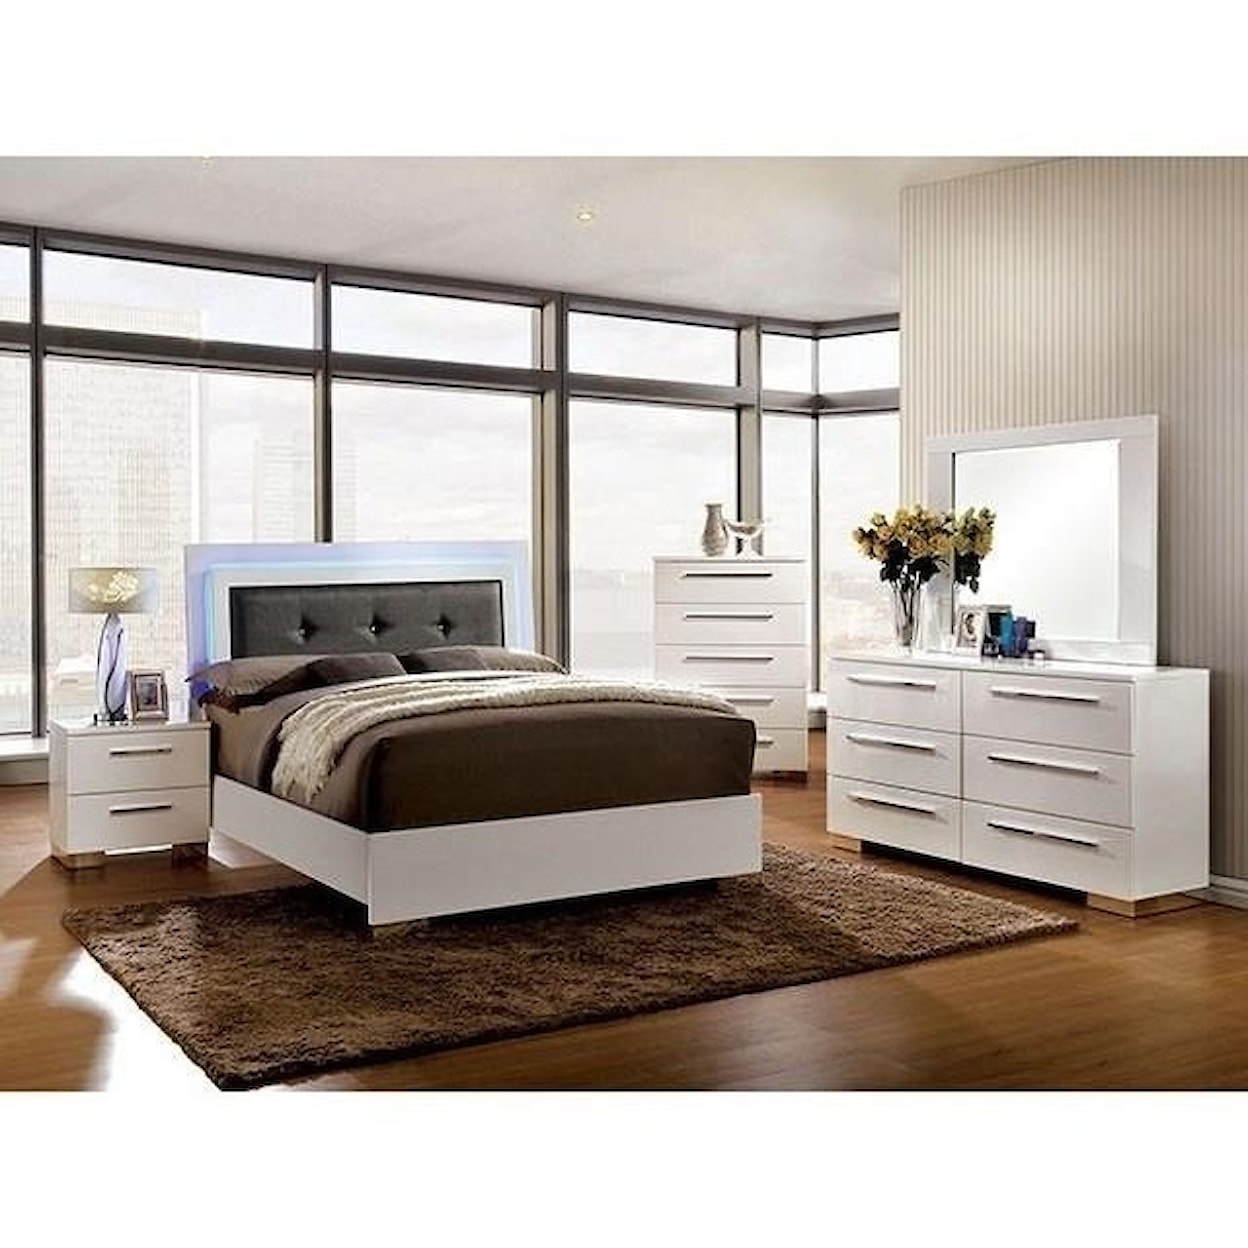 Furniture of America Clementine Full Bed